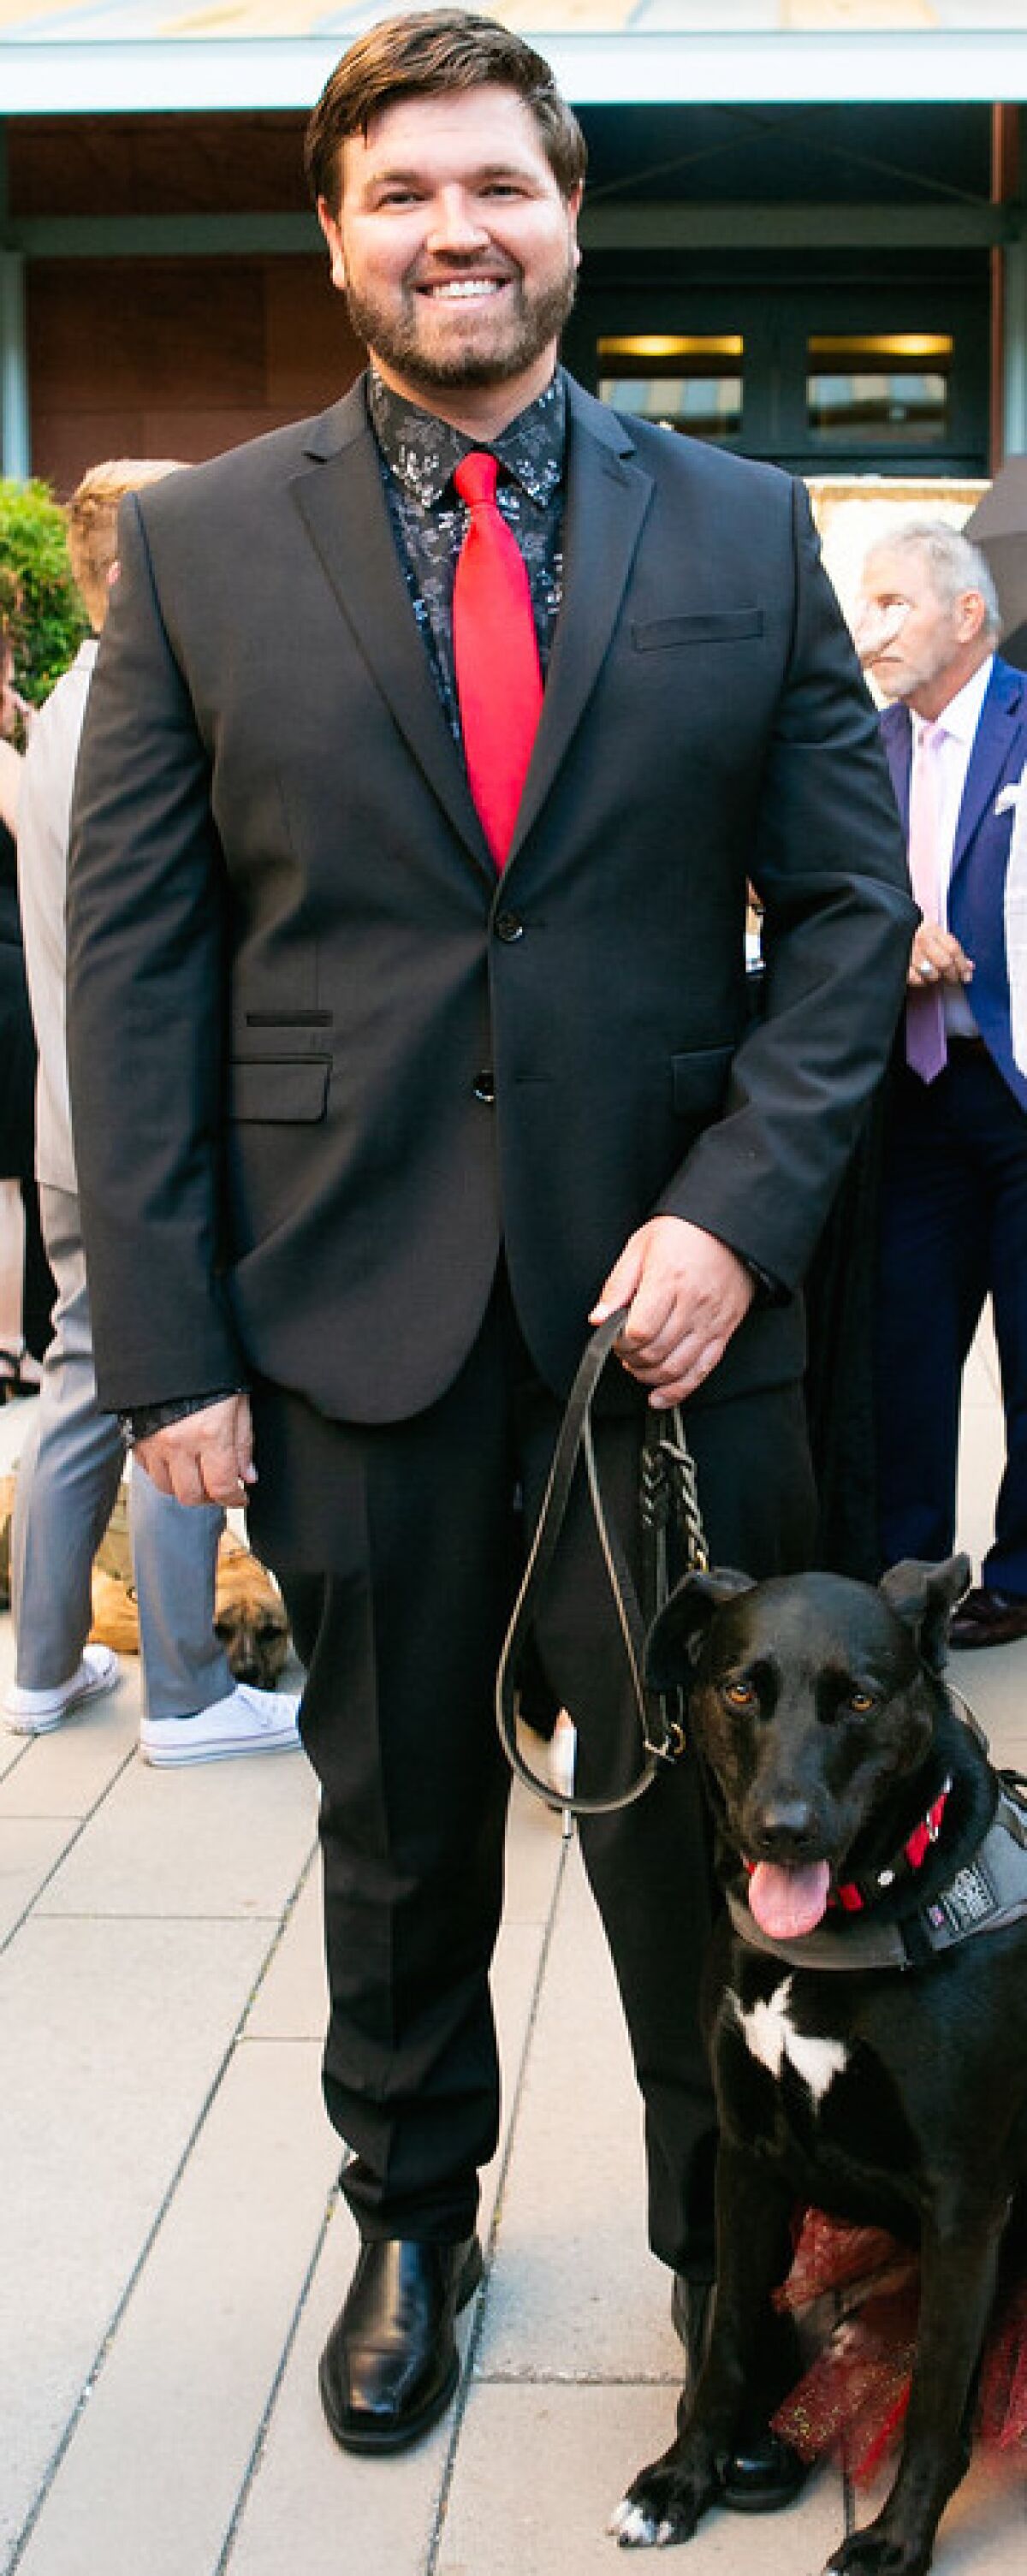 Aaron Neely, USN, and Liberty, STS service dog